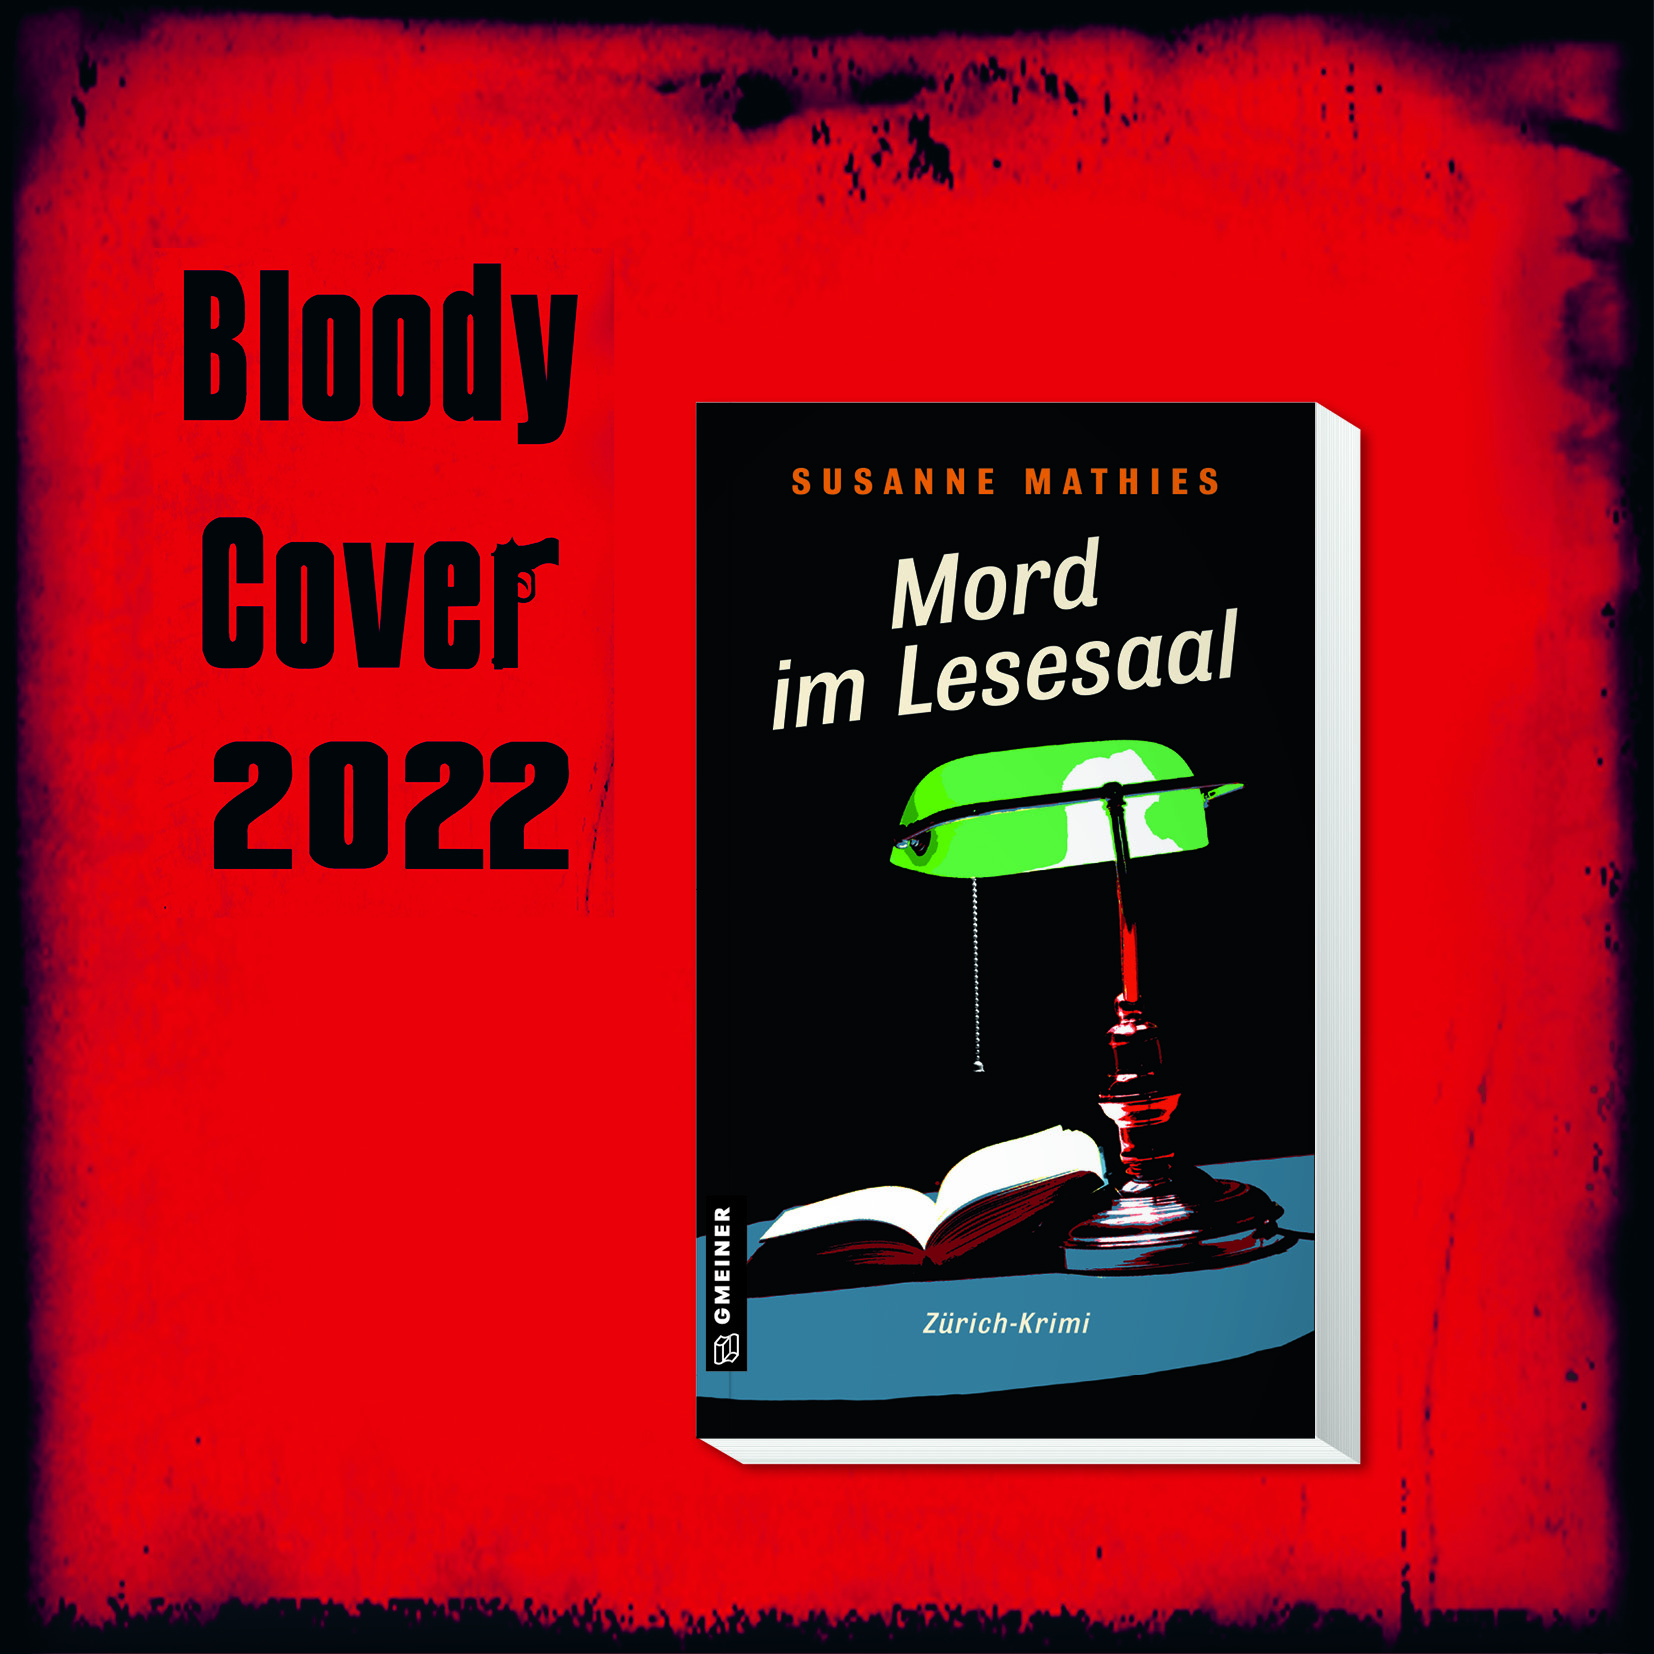 BloodyCover final